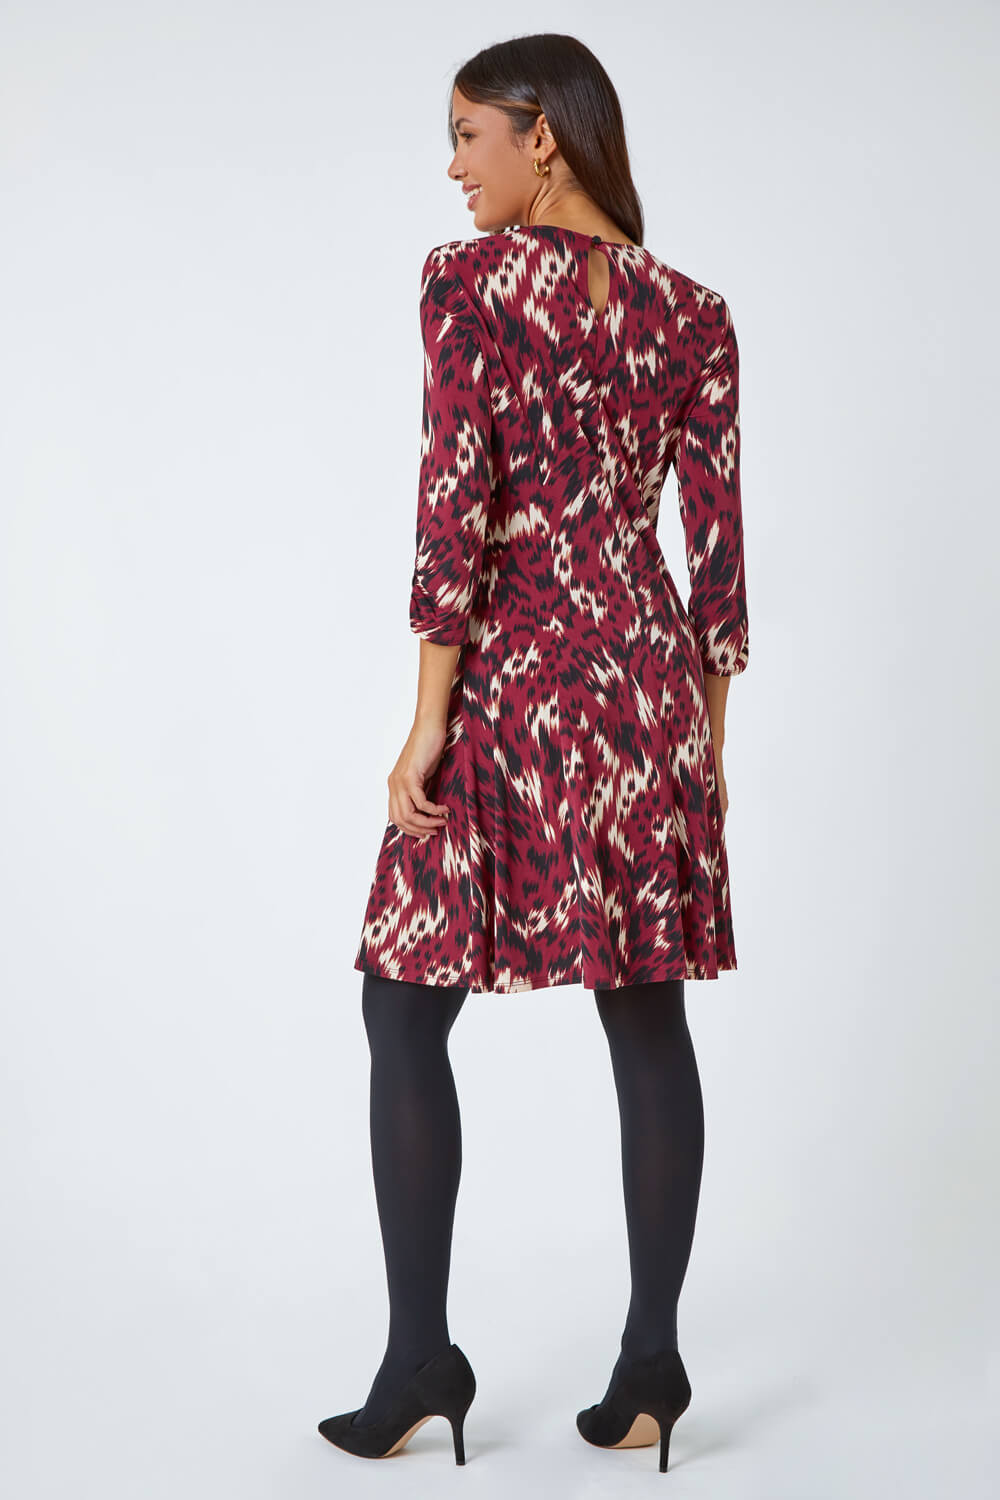 Port Abstract Ruched Stretch Jersey Dress, Image 3 of 5